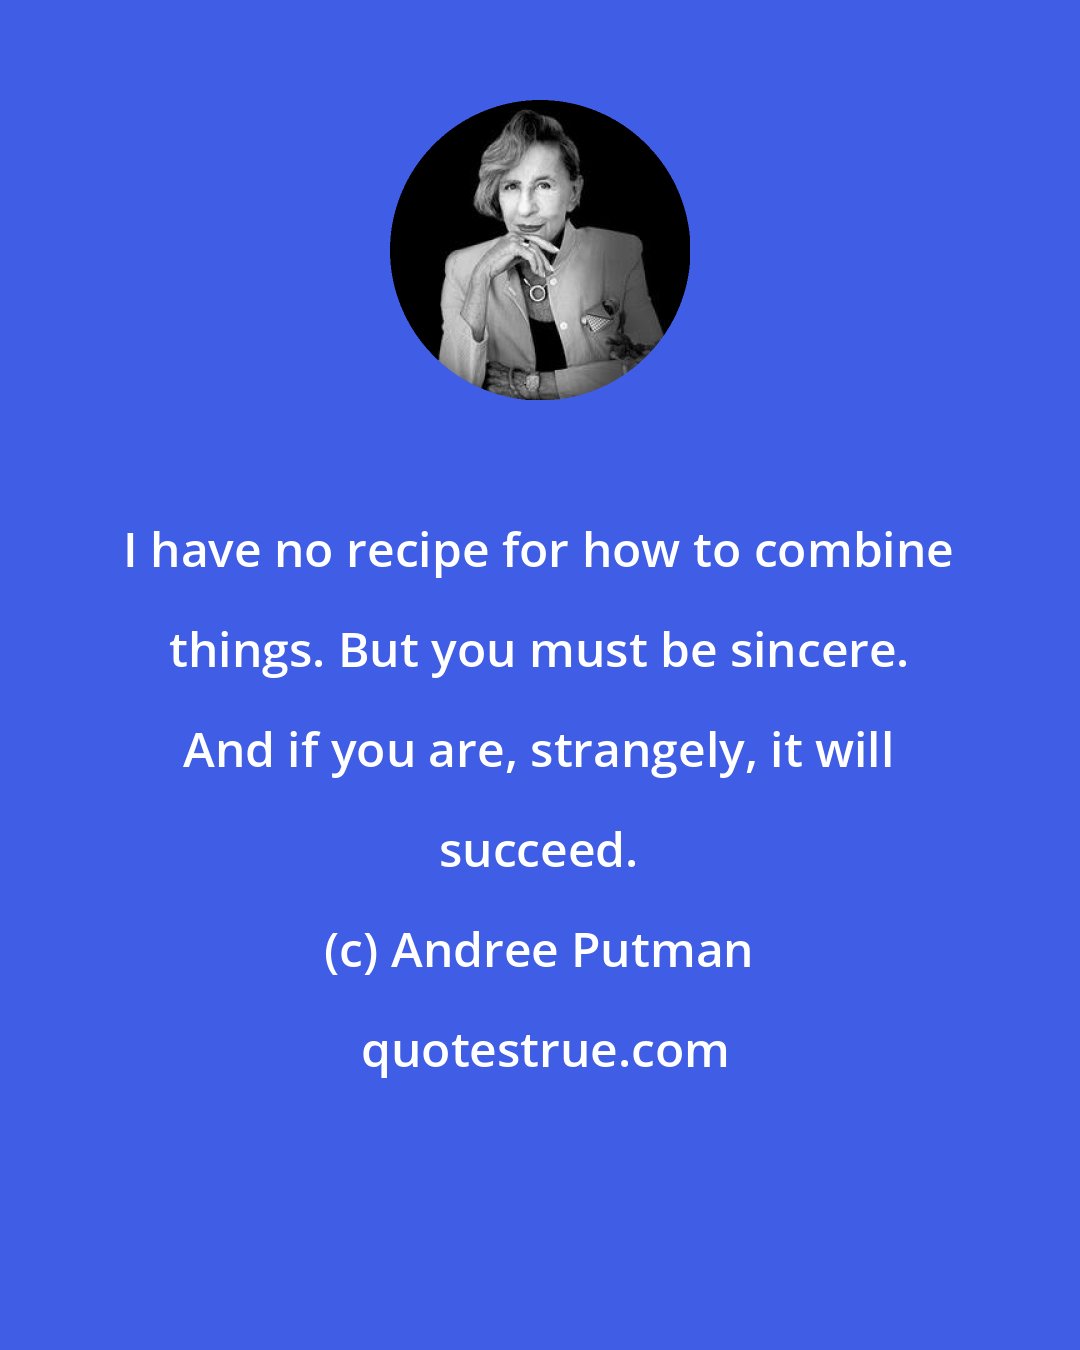 Andree Putman: I have no recipe for how to combine things. But you must be sincere. And if you are, strangely, it will succeed.